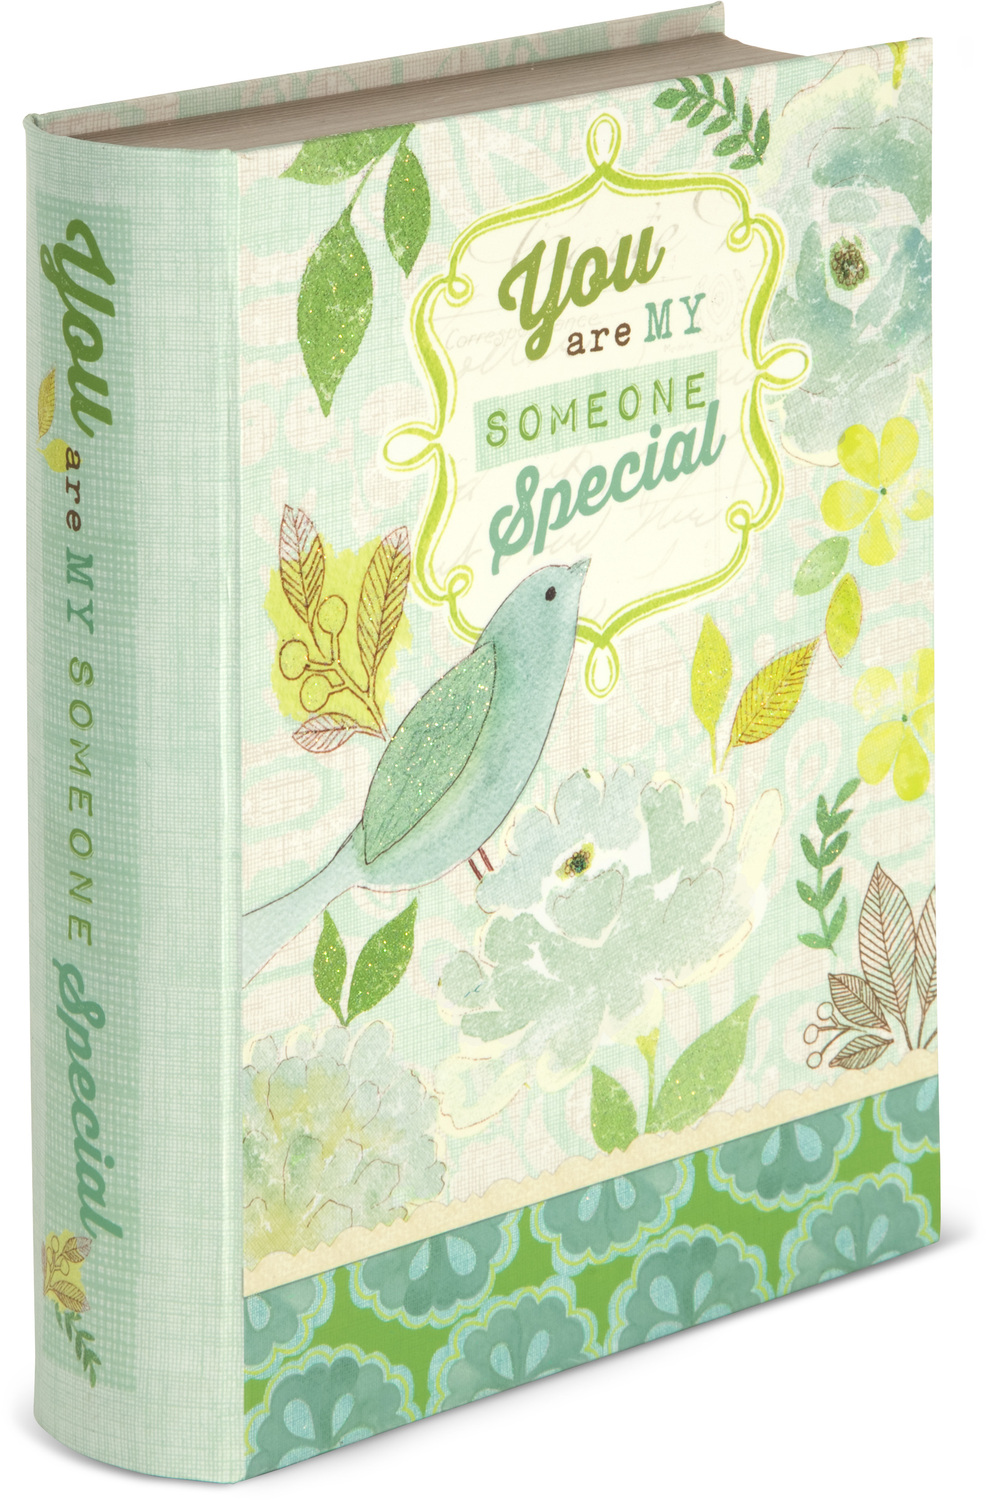 Someone Special by Vintage by Stephanie Ryan - Someone Special - 6.5" x 2" x 8.5" Musical Book Box